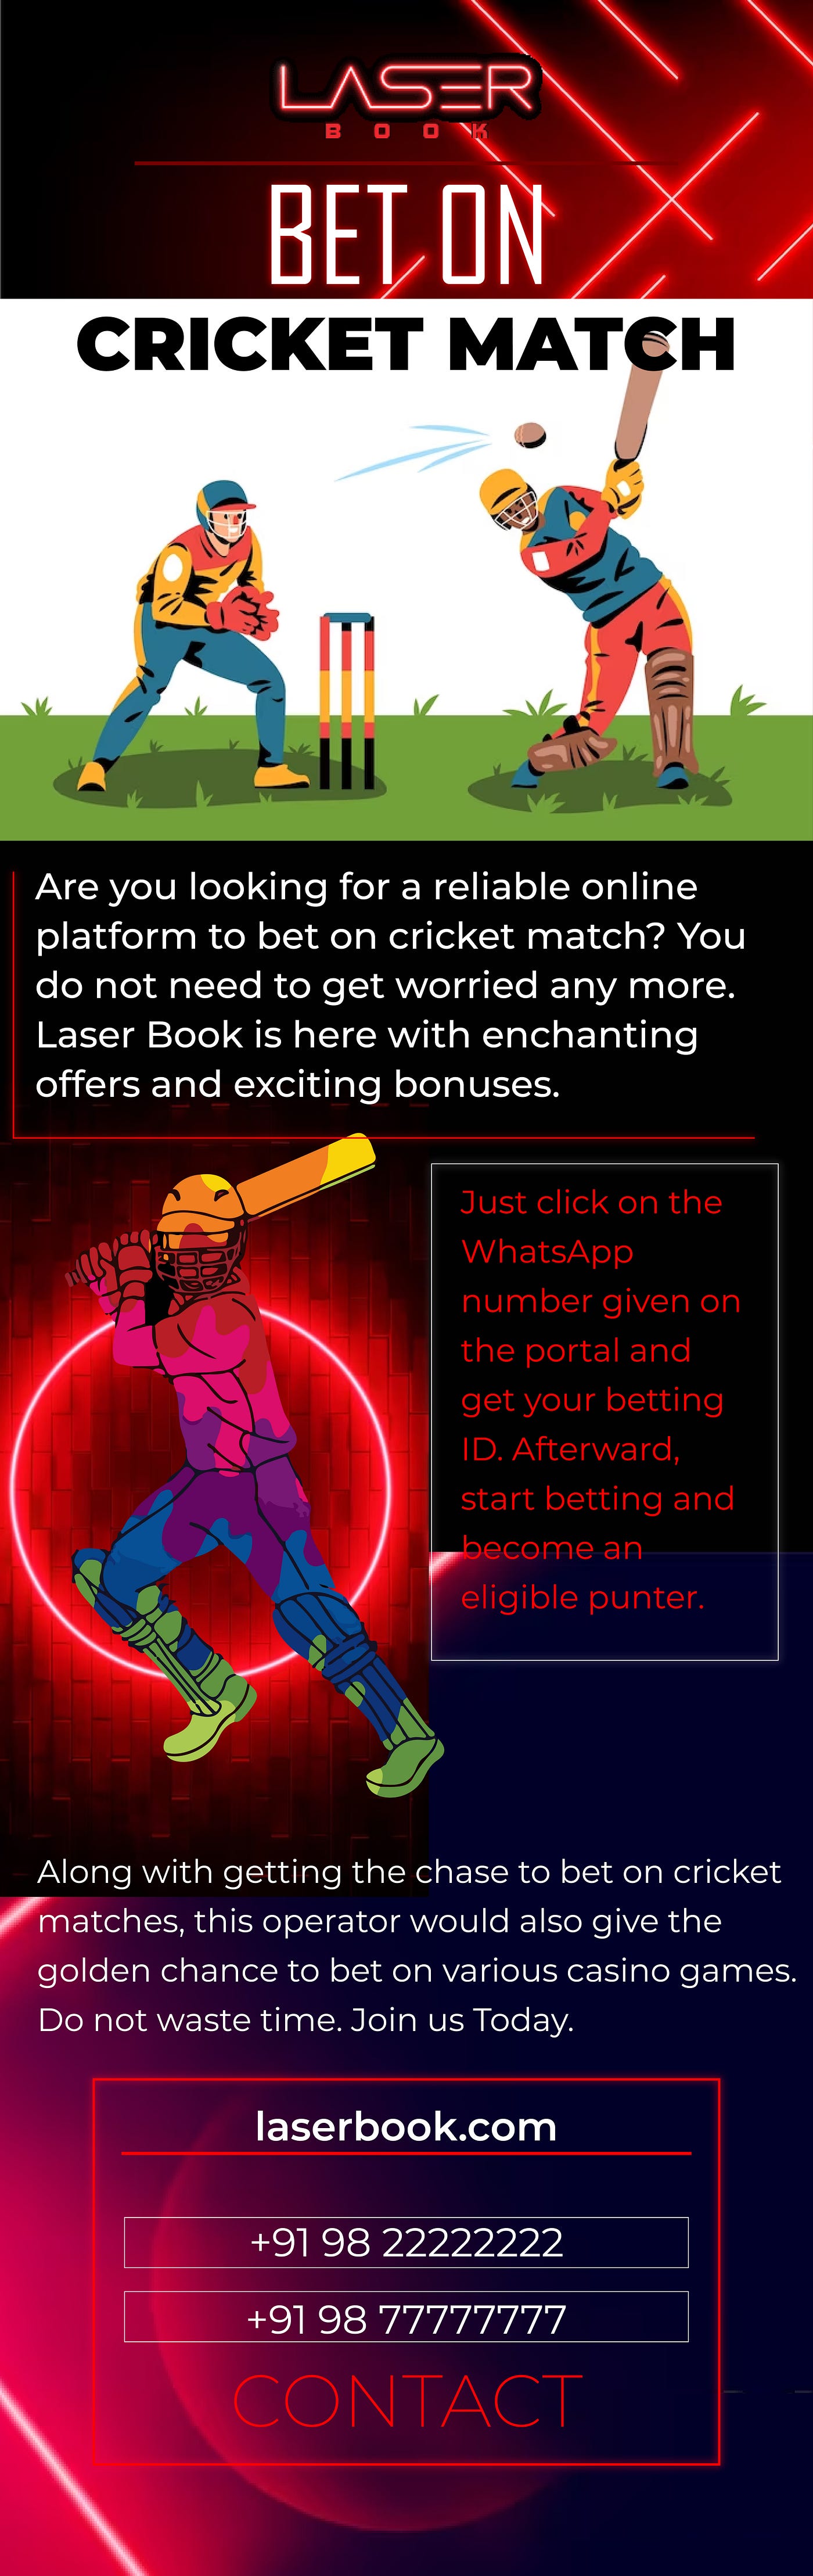 Searching for an Opportunity to bet on cricket match? Visit the site of LaserBook Today! - Laser Book